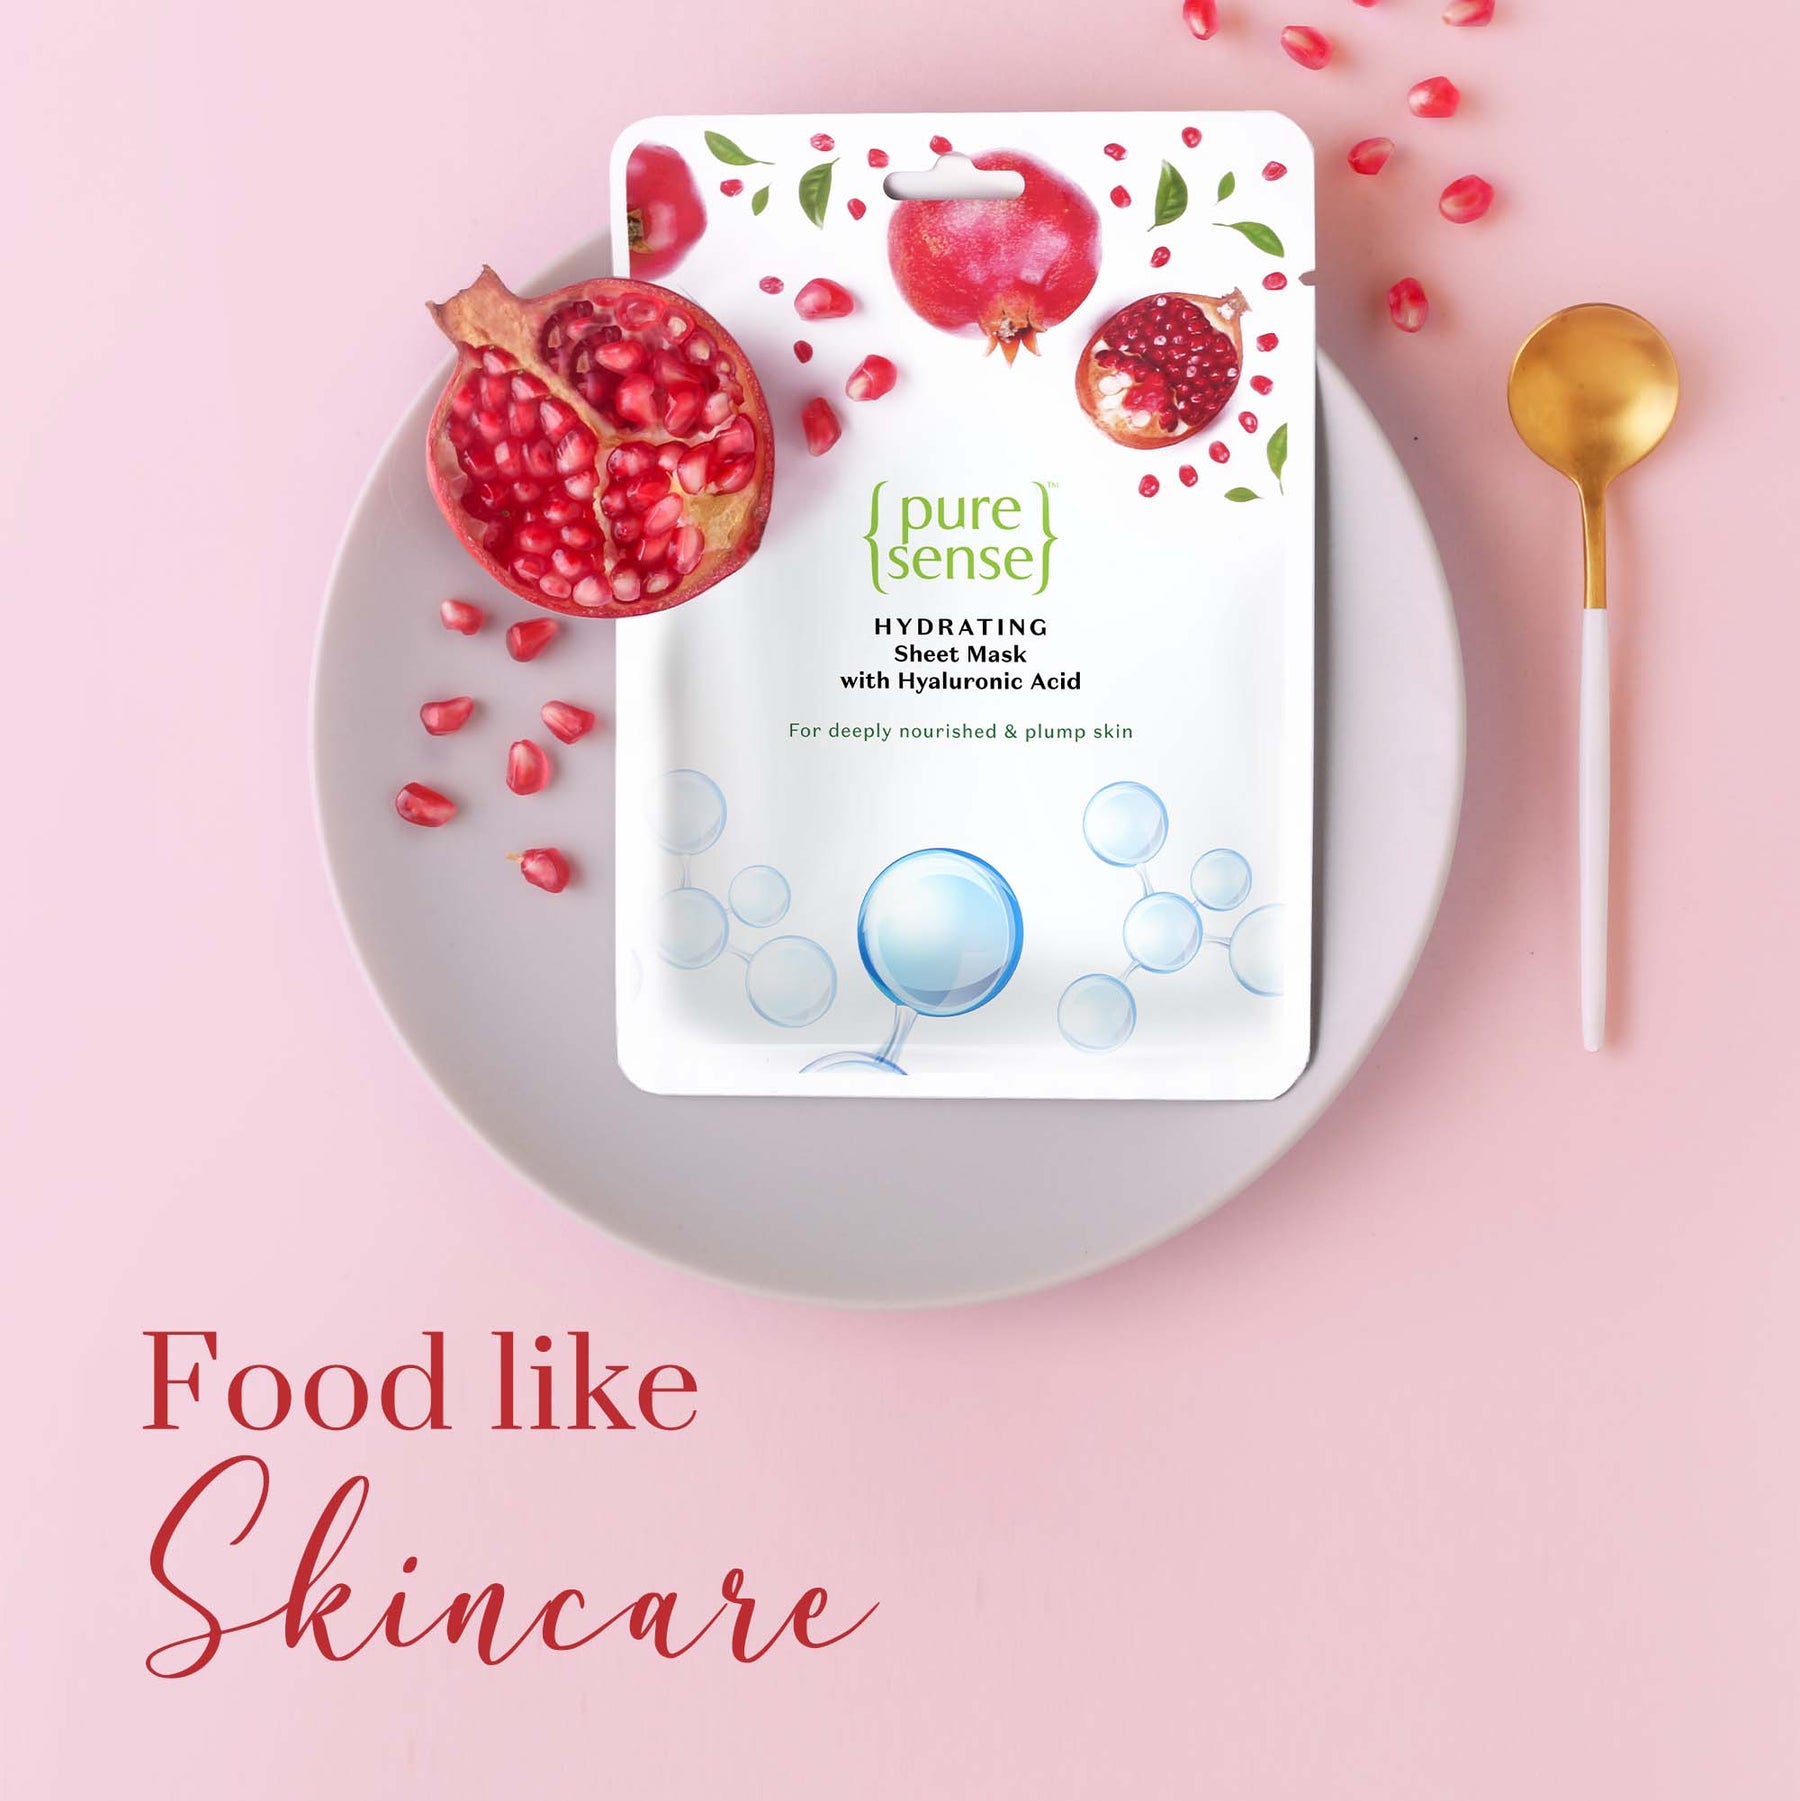 Hydrating Sheet Mask with Hyaluronic Acid | From the makers of Parachute Advansed | 30ml